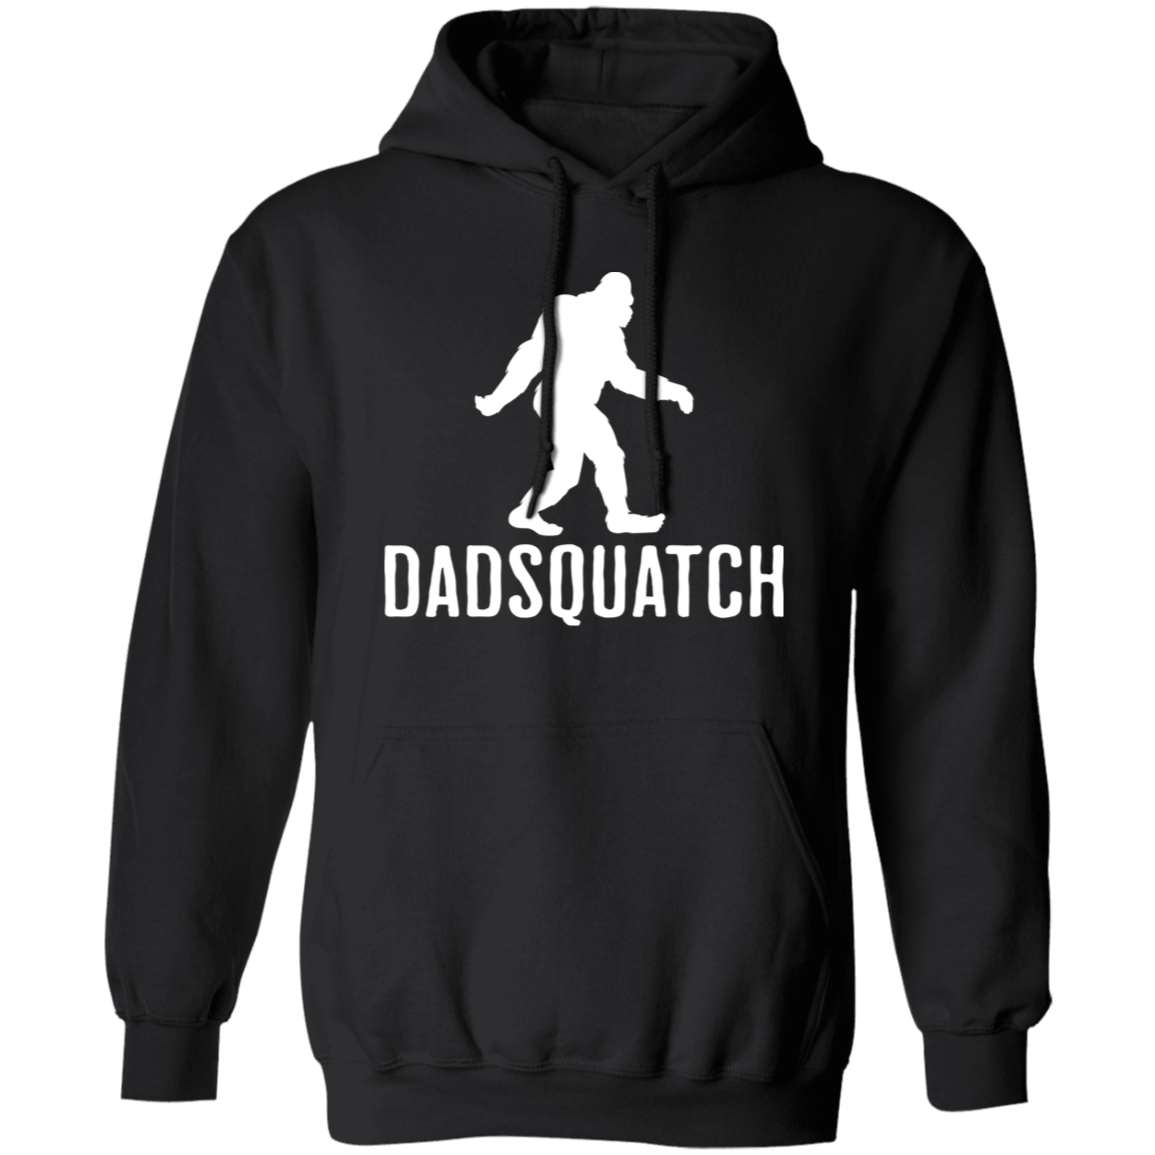 Black Dadsquatch Bigfoot hoodie for Dads